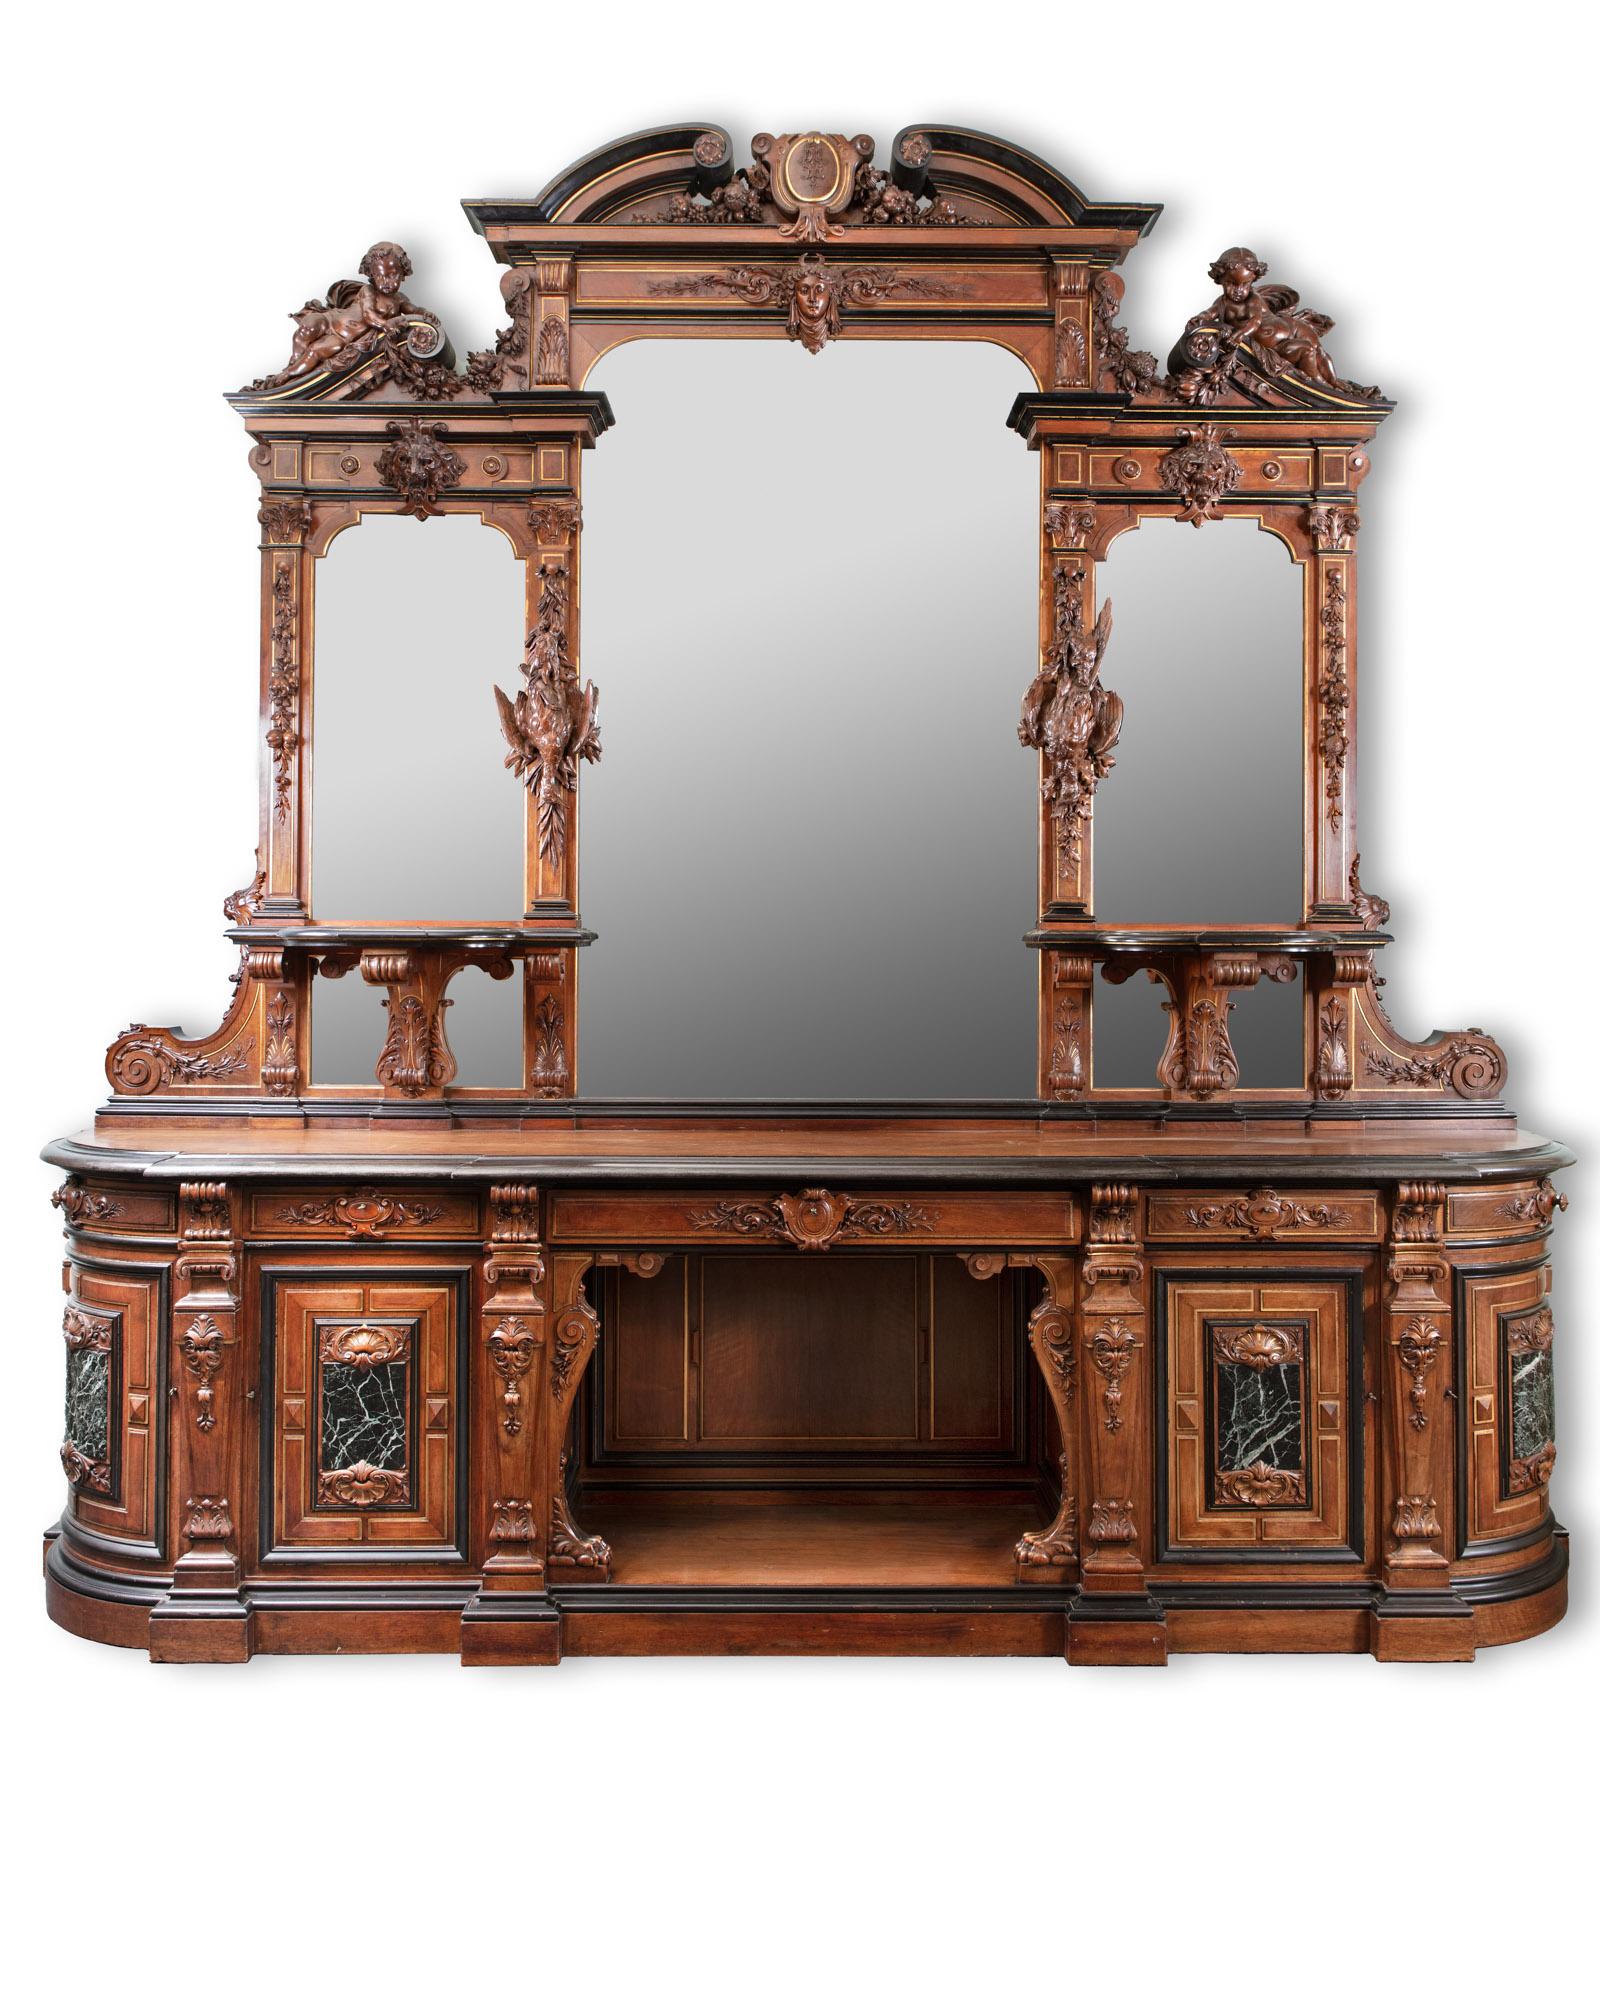 19th Century Monumental Carved Walnut Mirrored French Buffet by Guéret Frères   In Good Condition For Sale In Baambrugge, NL